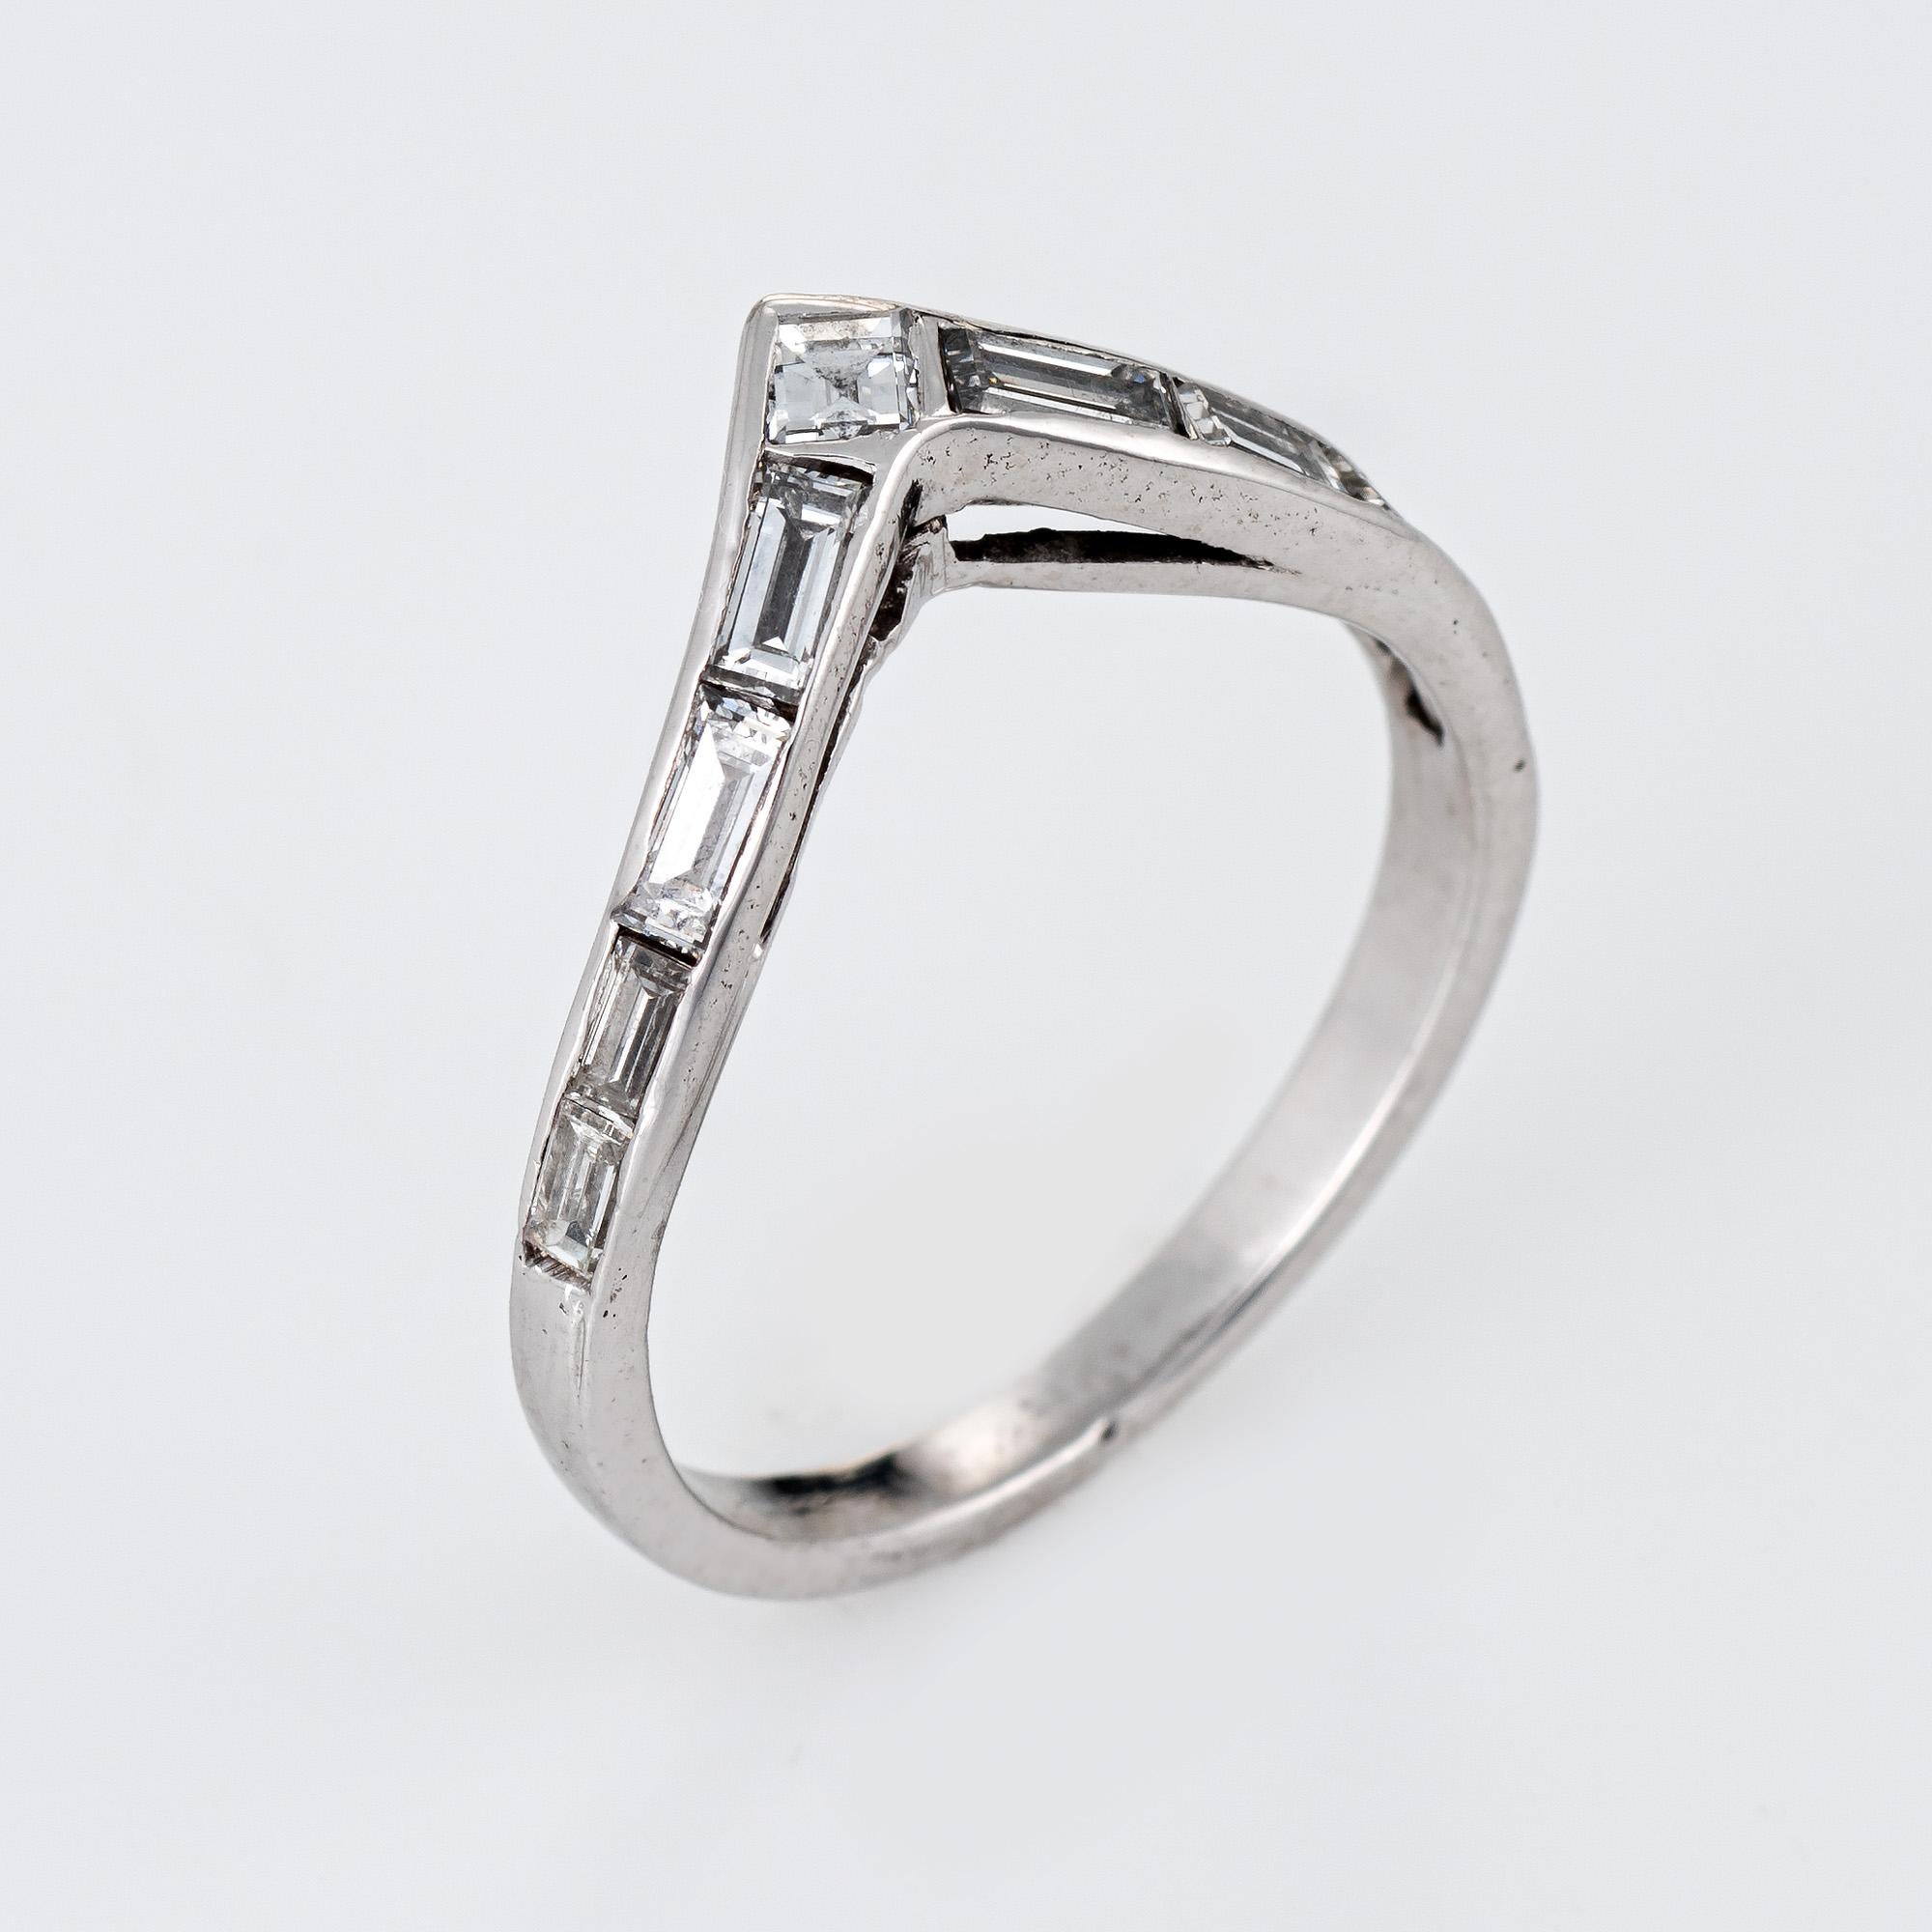 Stylish vintage diamond 'V' band (circa 1960s to 1970s) crafted in 900 platinum. 

Straight baguette & emerald cut diamonds total an estimated 0.50 carats (estimated at H-I color and VS2-SI1 clarity). 

The V shaped ring is set with baguette cut